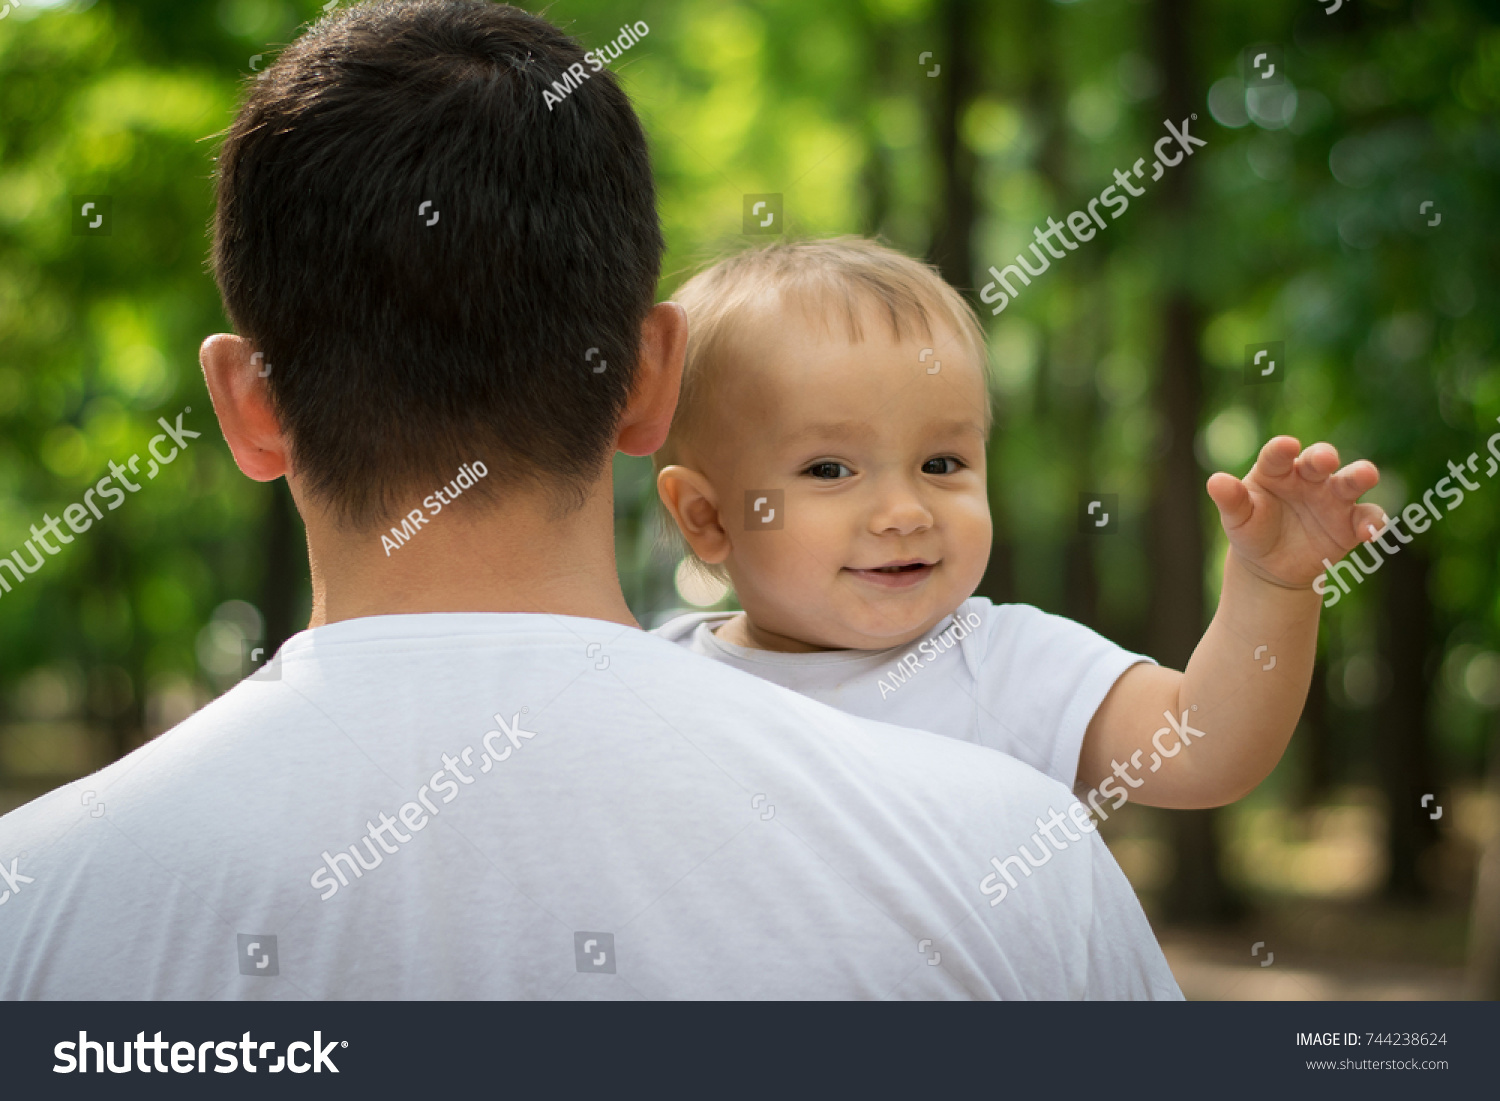 Smiling baby boy waving hand while father holds him in arms. Safe childhood concept #744238624